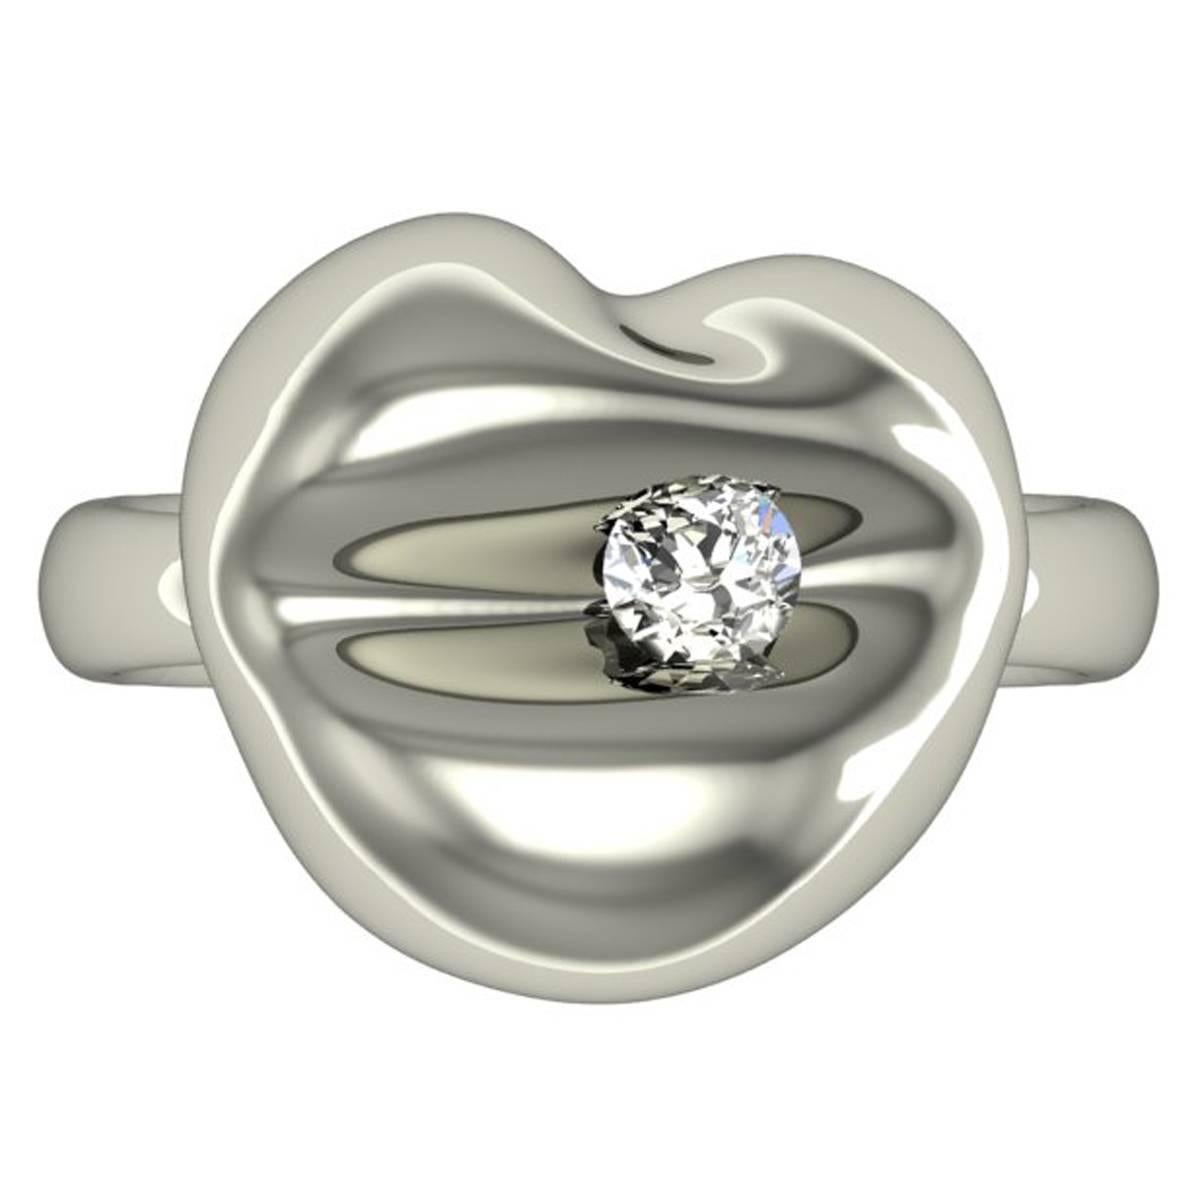 Barbara Nanning & Sparkles Diamond and Gold Kiss Ring For Sale